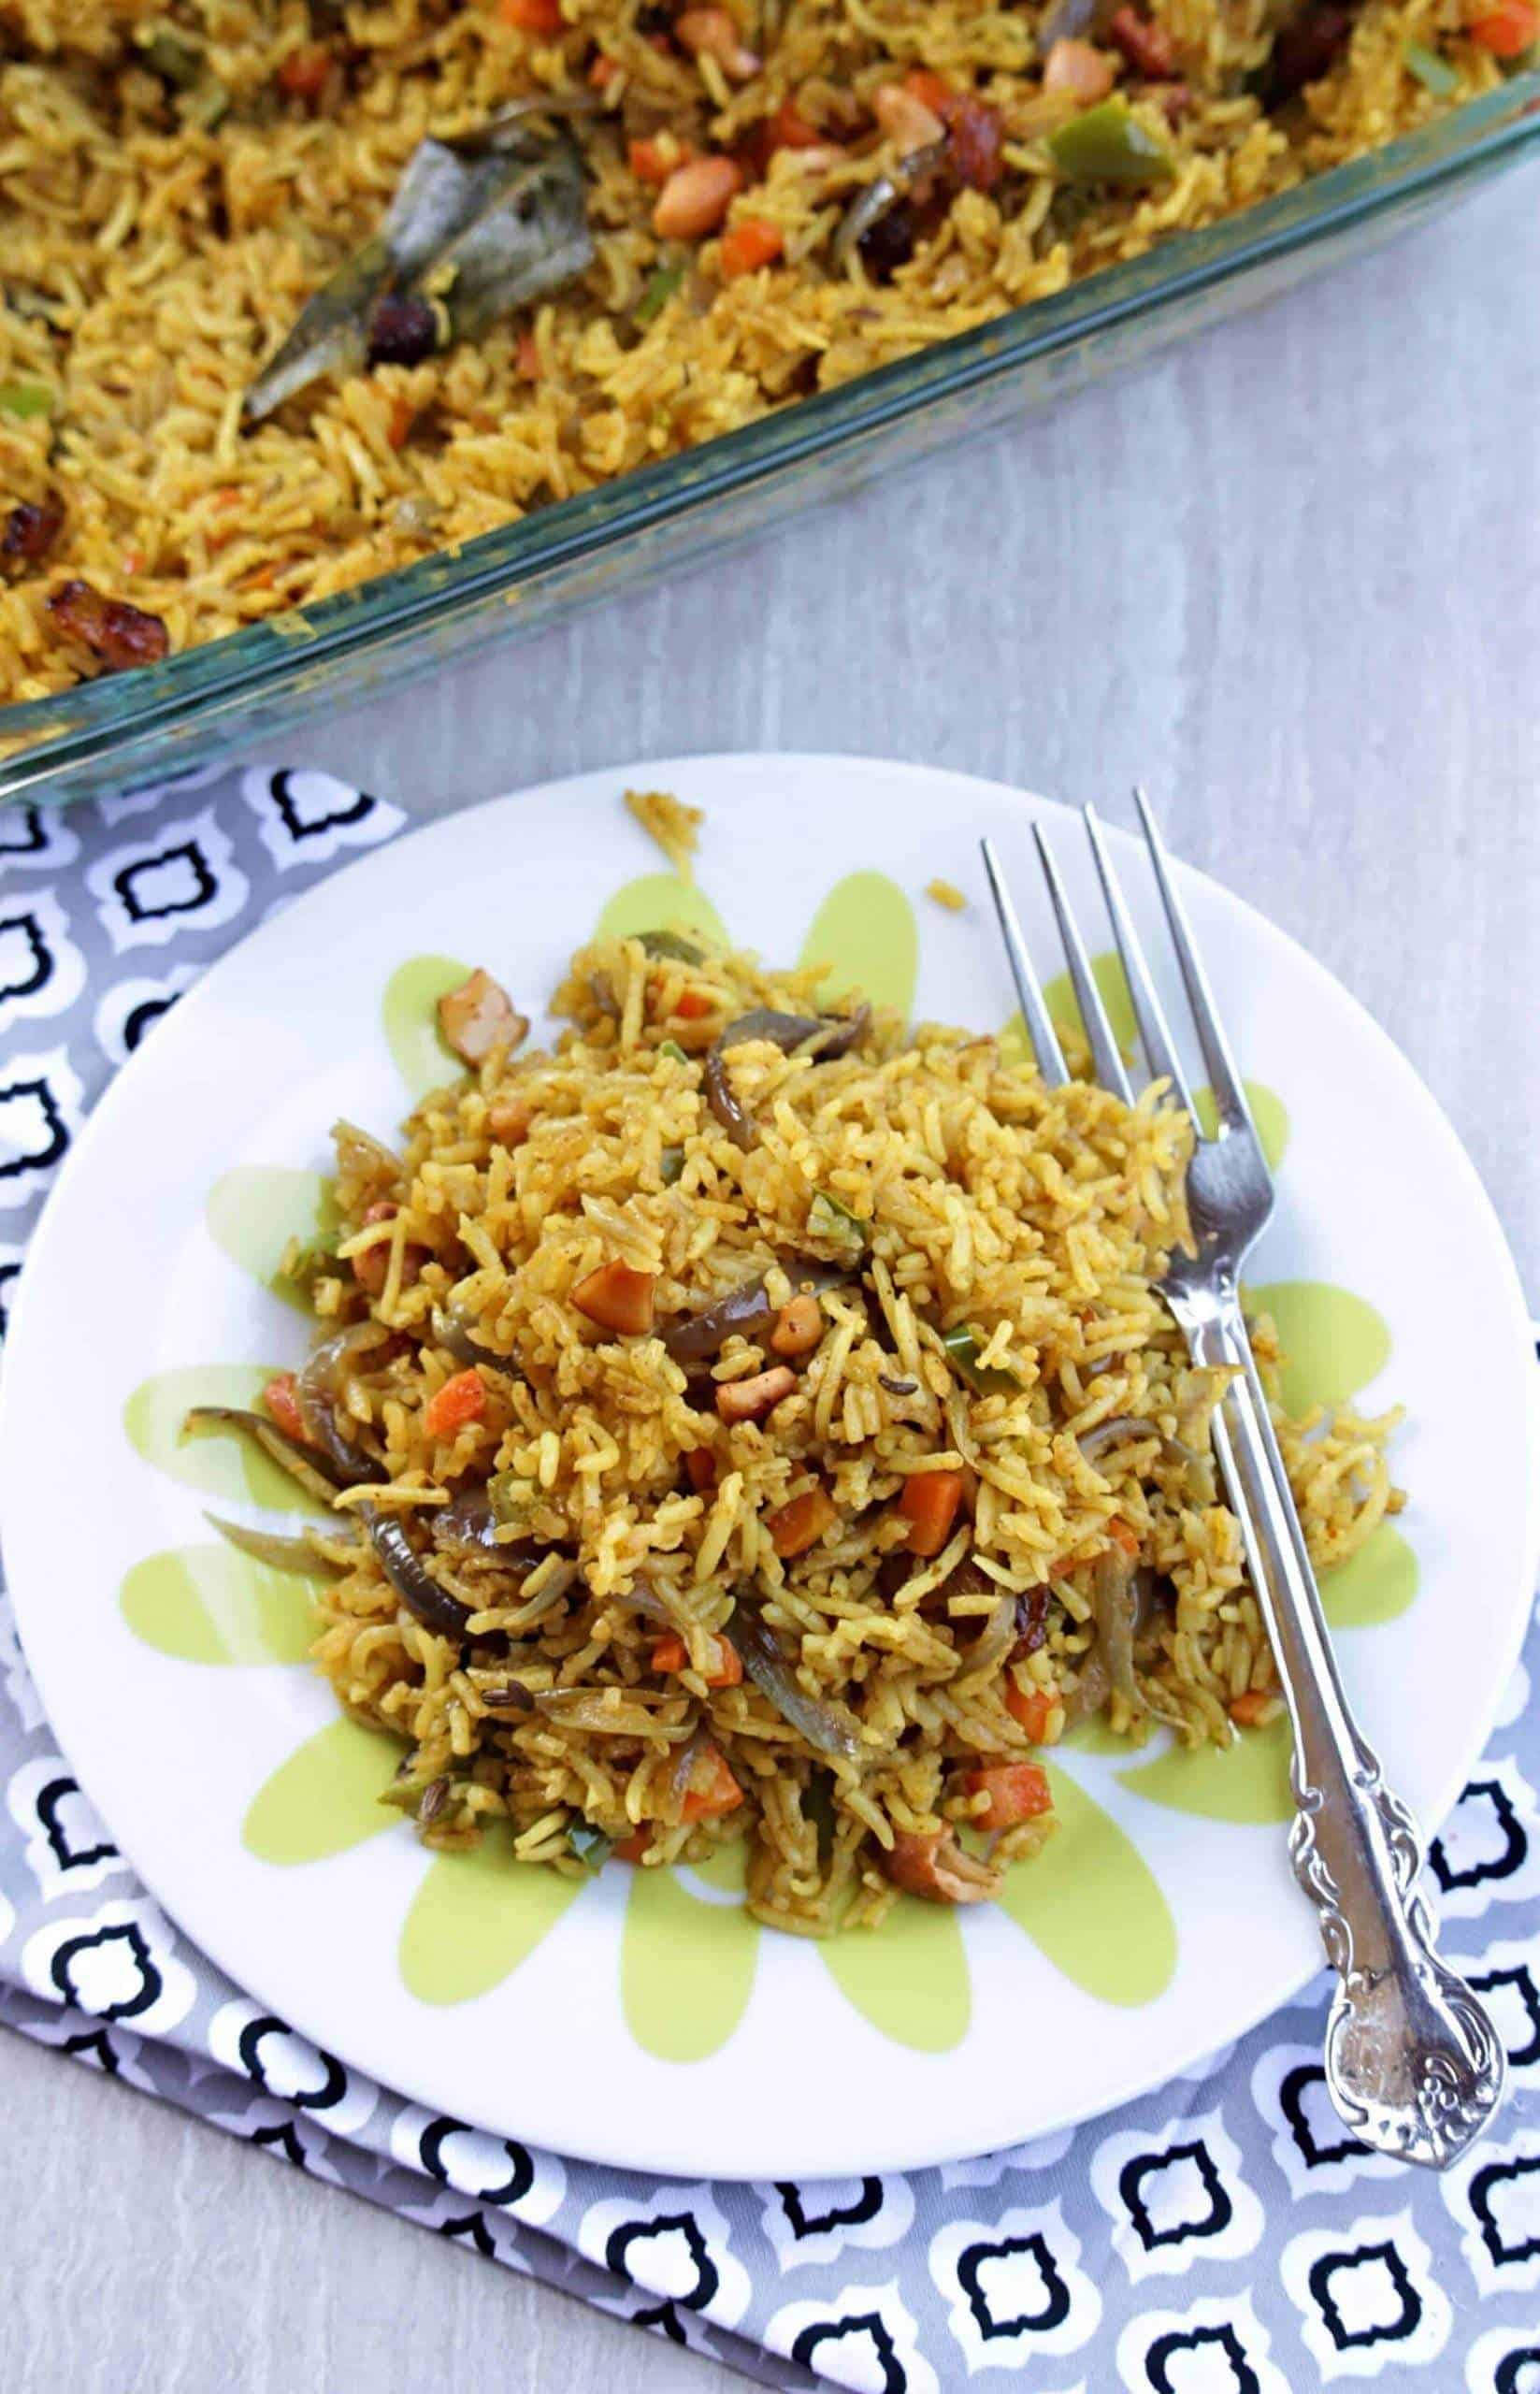 Biriyani in a plate with fork